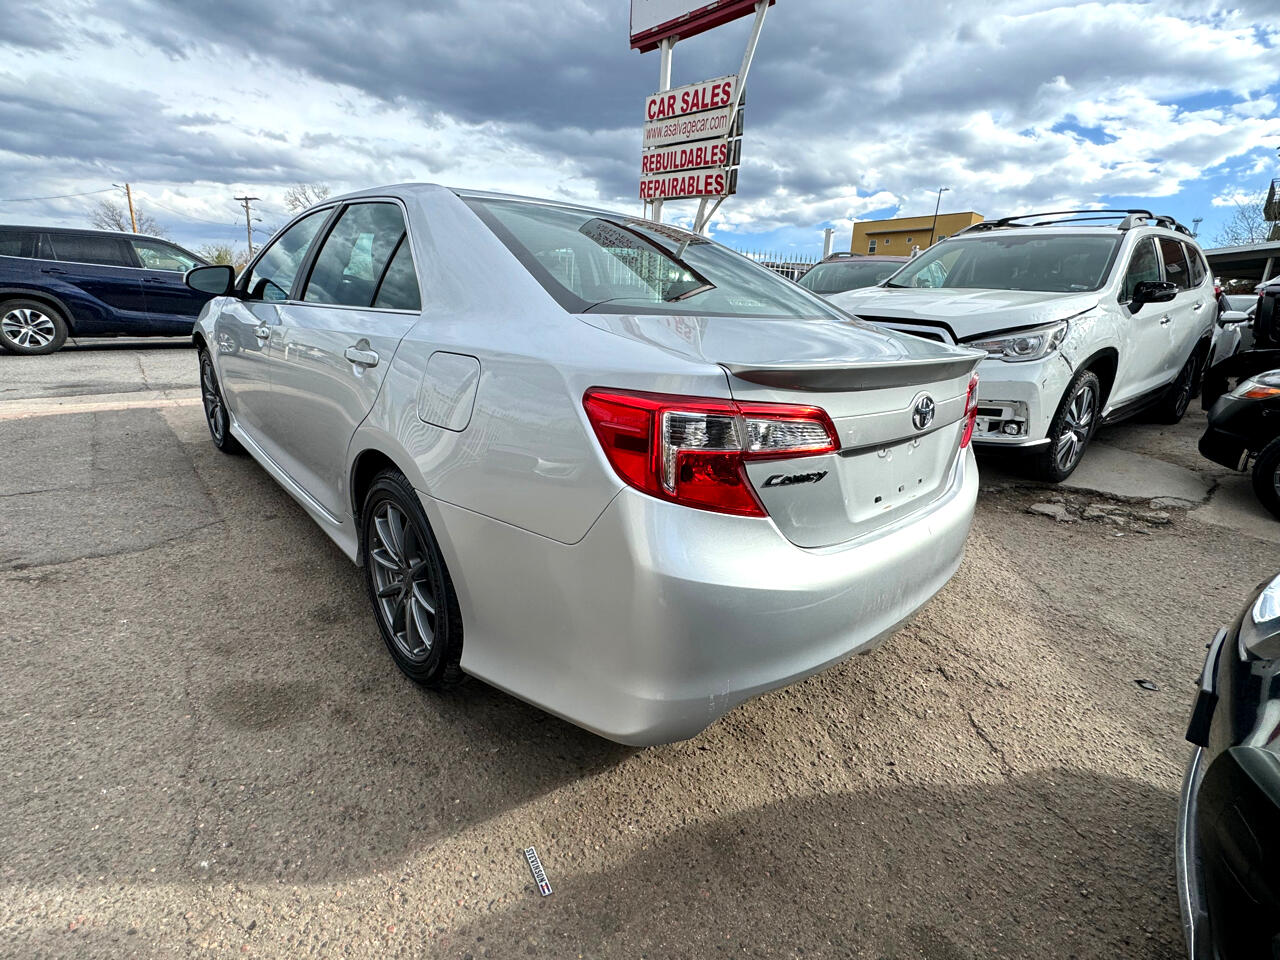 2013 Toyota Camry 4dr Sdn I4 Auto XLE (Natl)